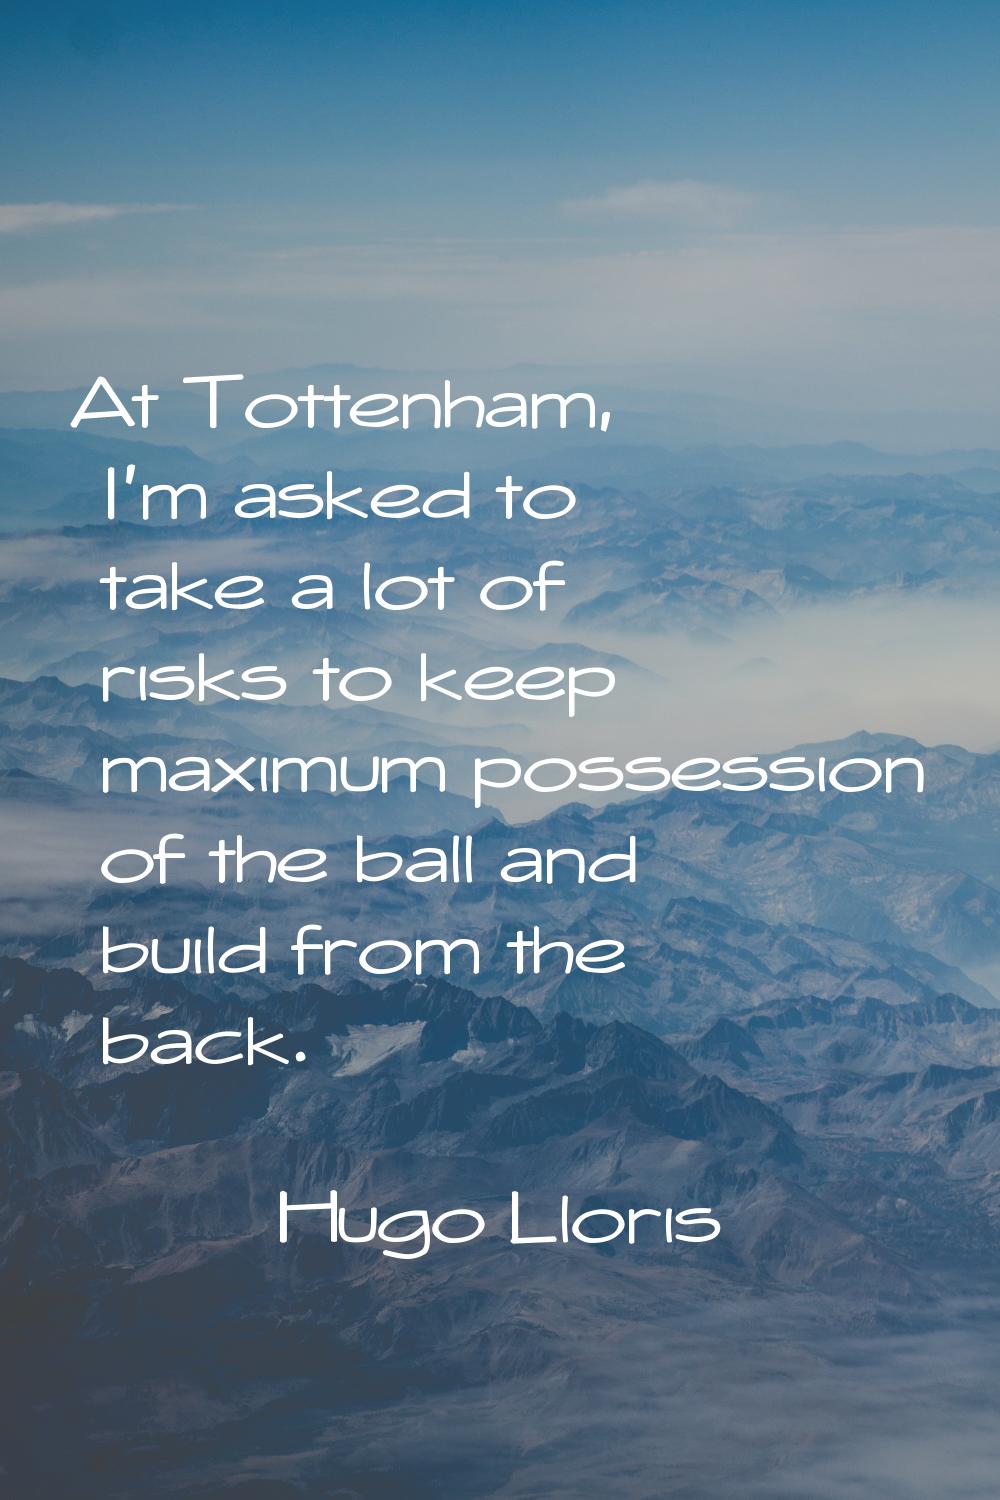 At Tottenham, I'm asked to take a lot of risks to keep maximum possession of the ball and build fro